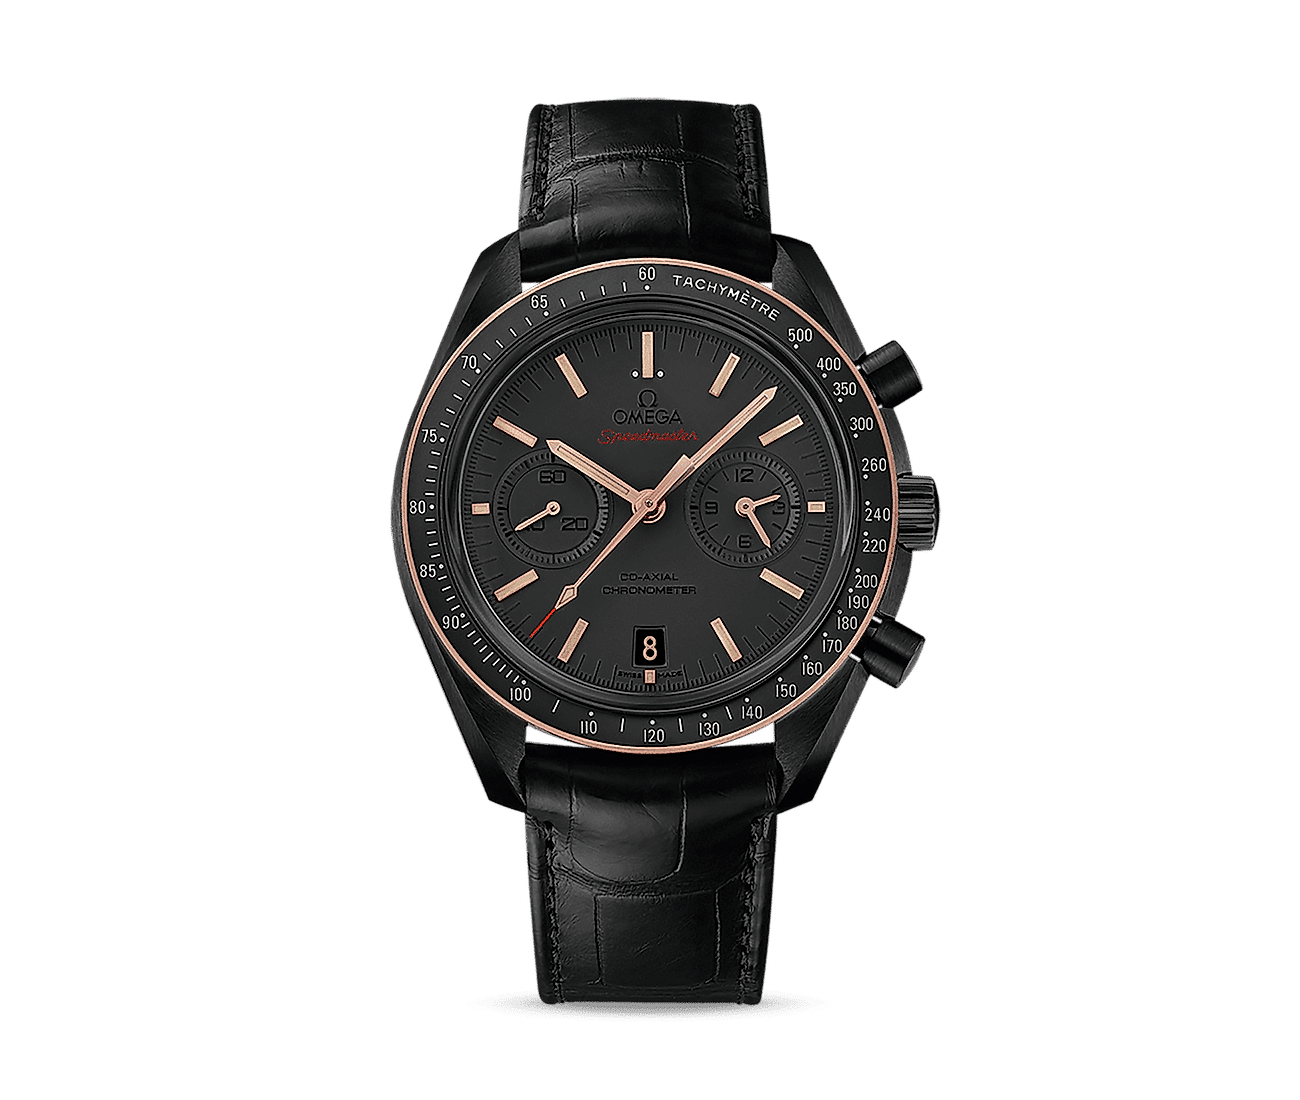 Moonwatch Omega Co-axial Chronograph 44.25 Mm